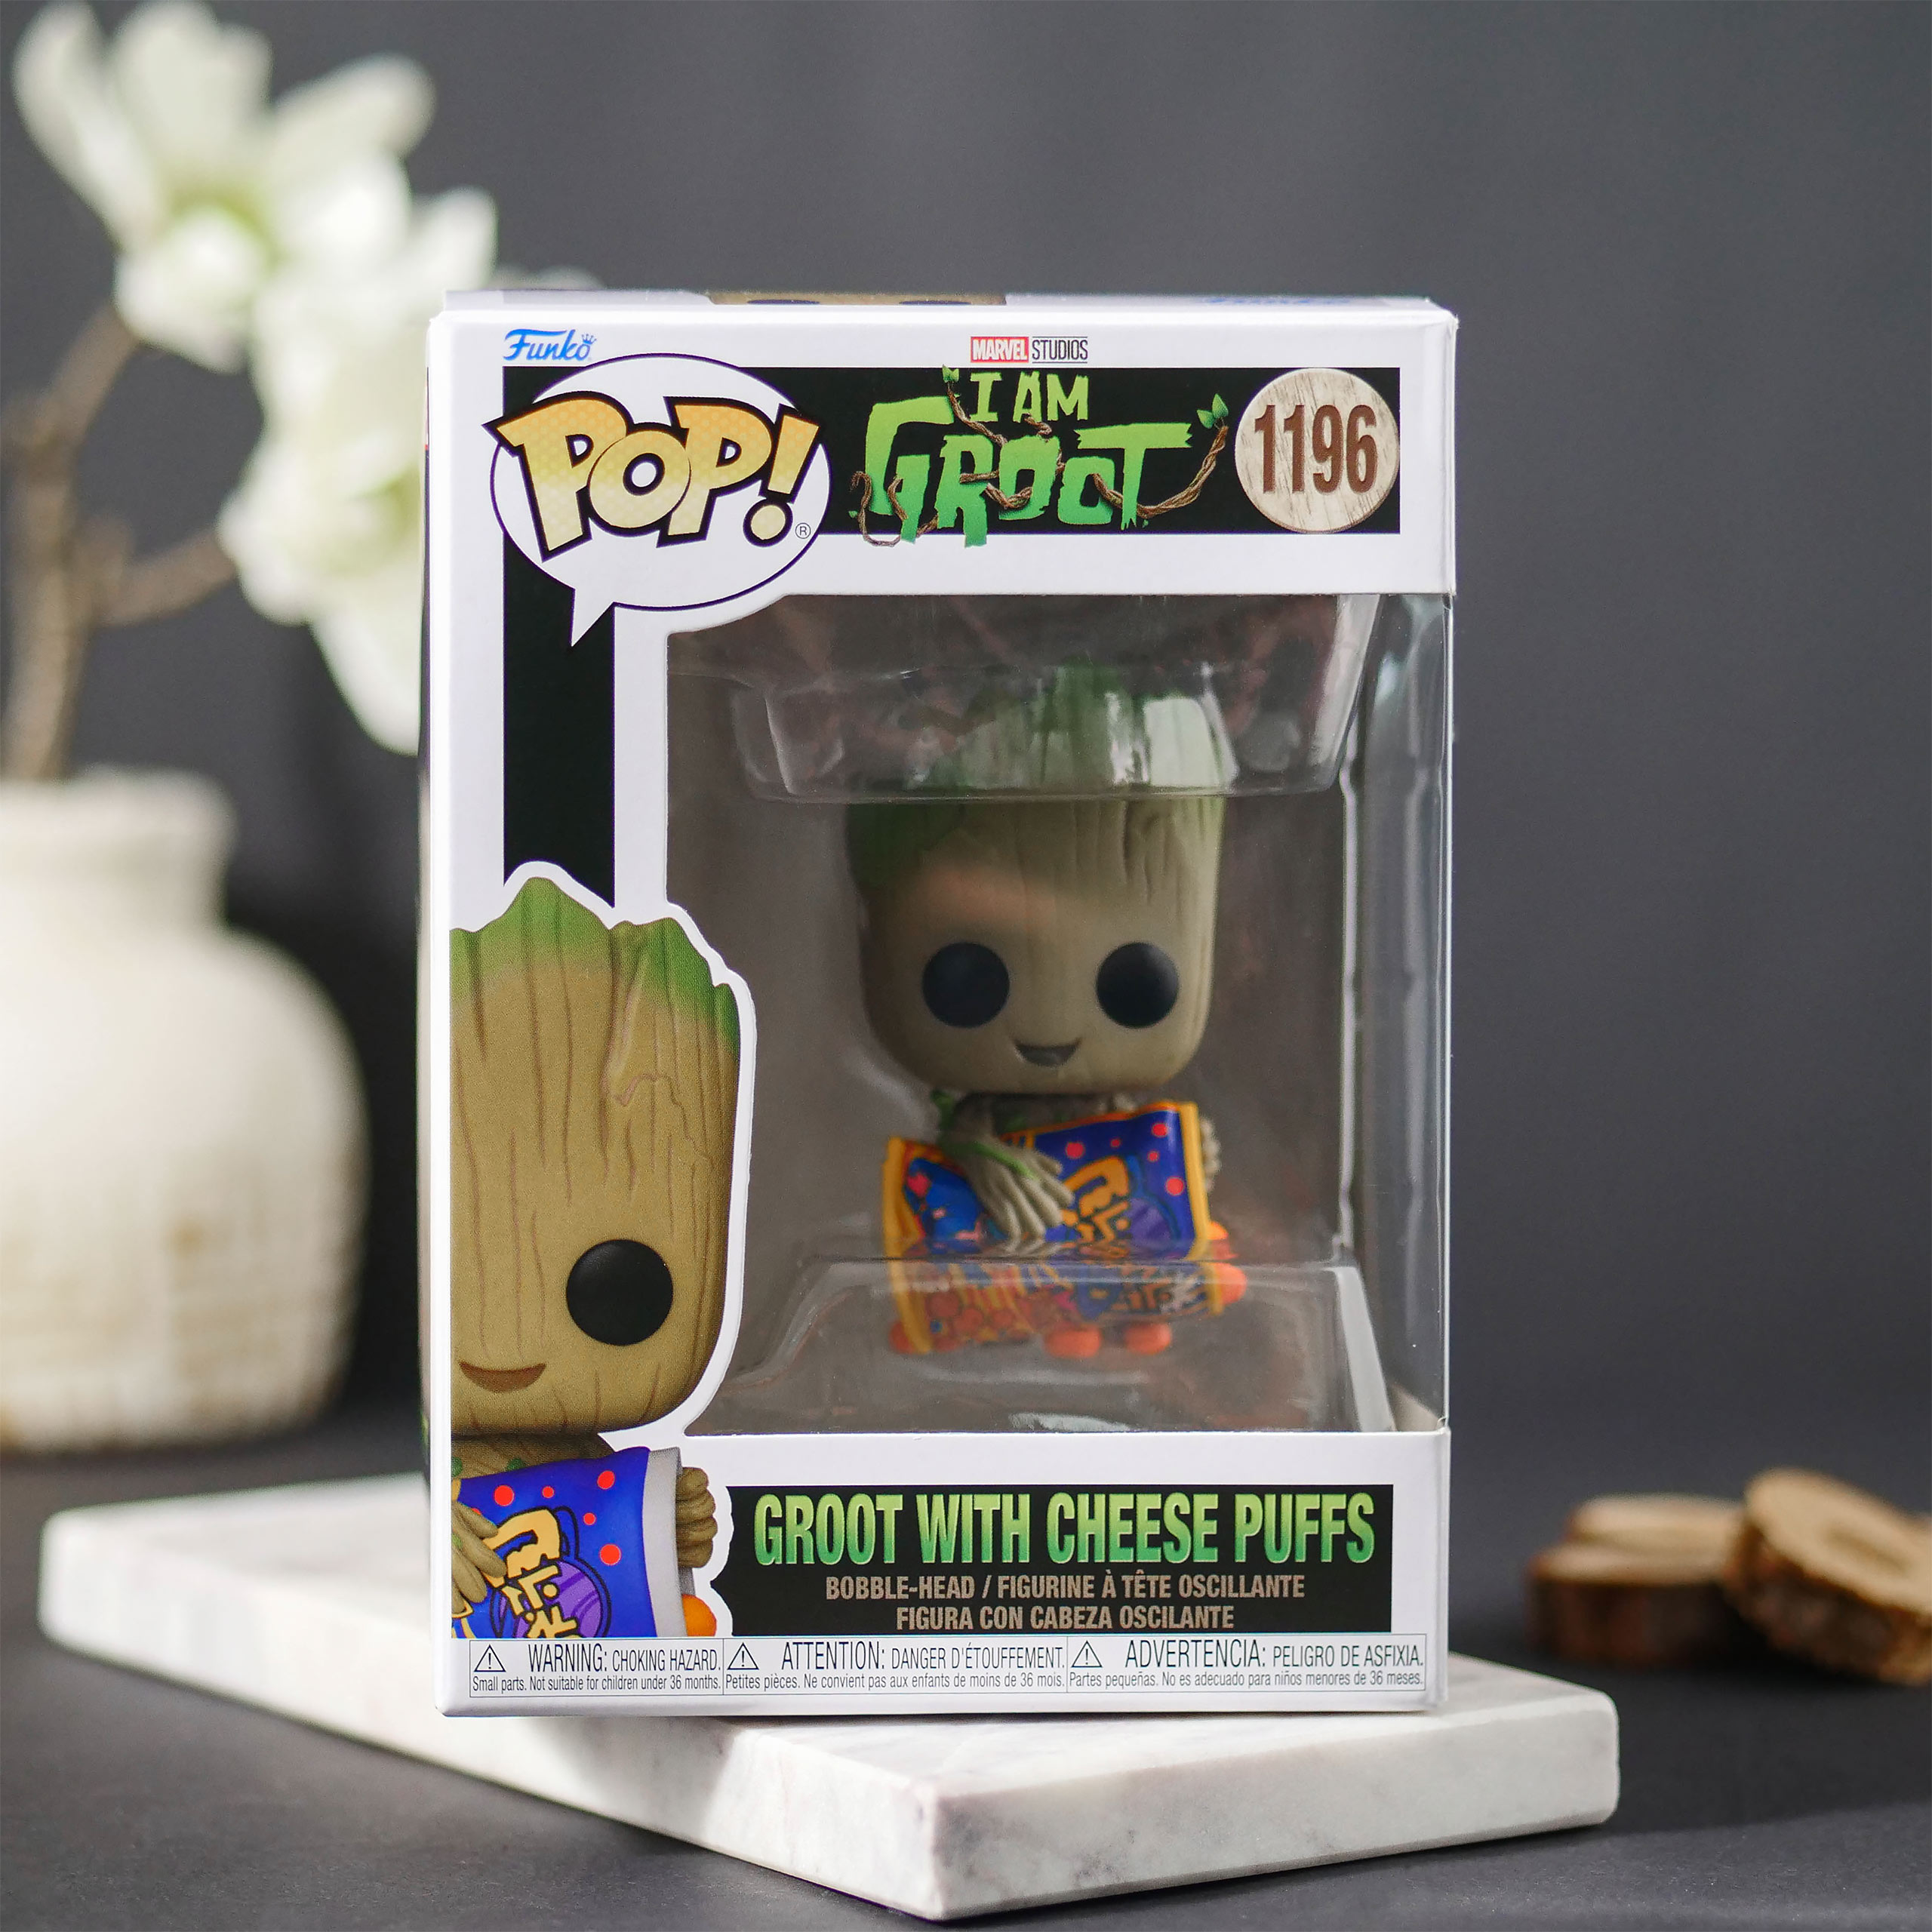 I Am Groot - Groot with cheese balls Funko Pop bobblehead figure